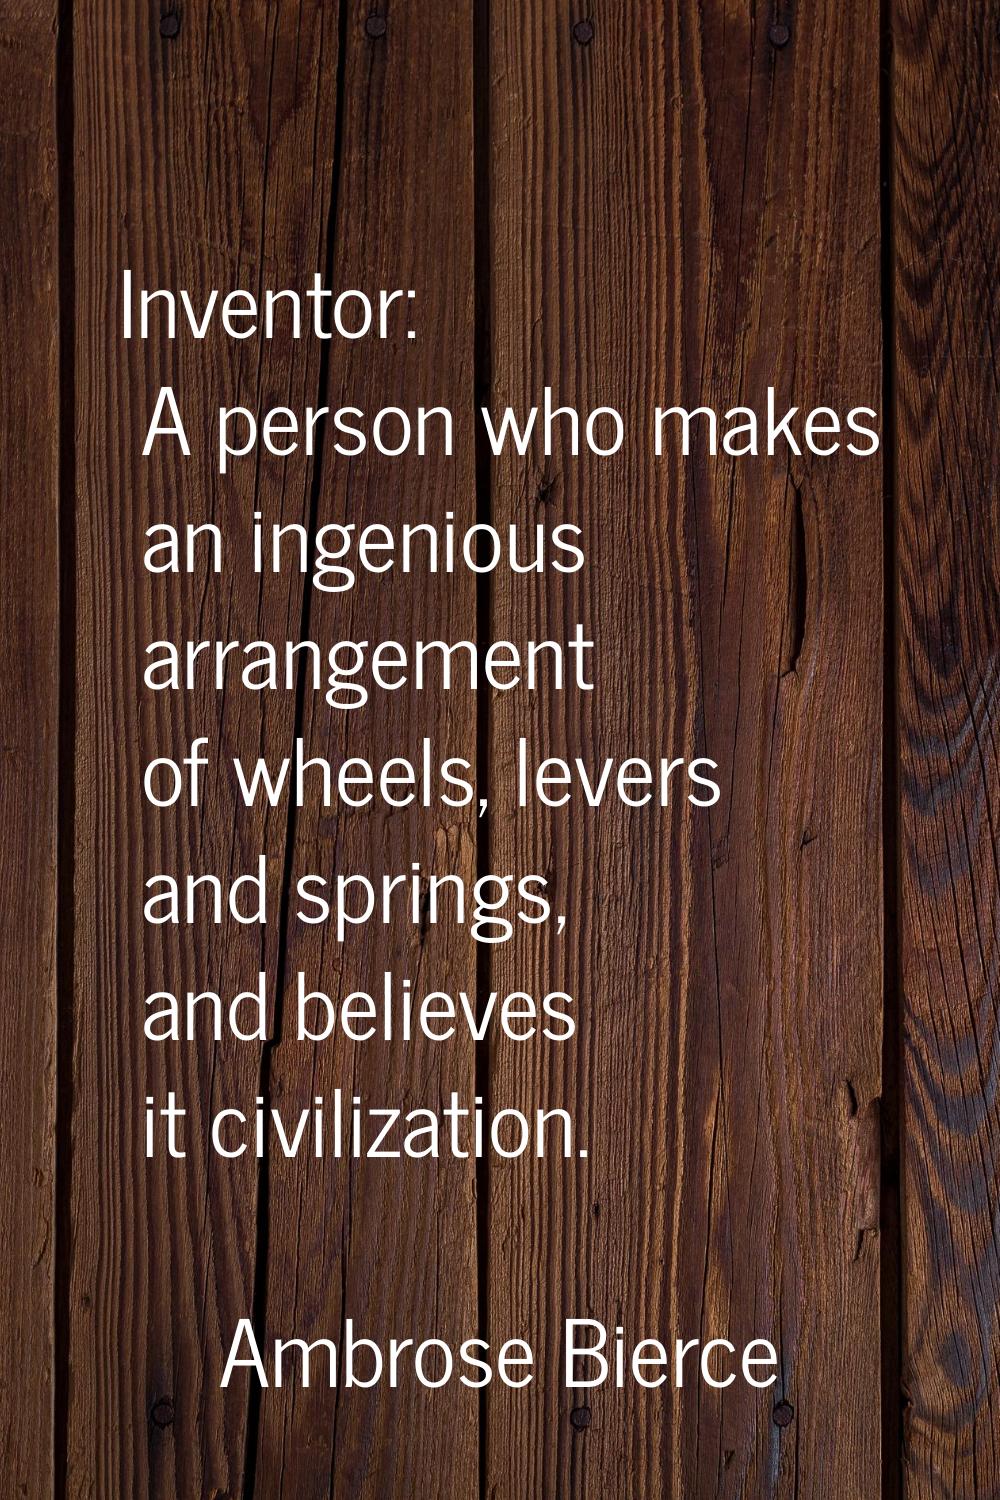 Inventor: A person who makes an ingenious arrangement of wheels, levers and springs, and believes i